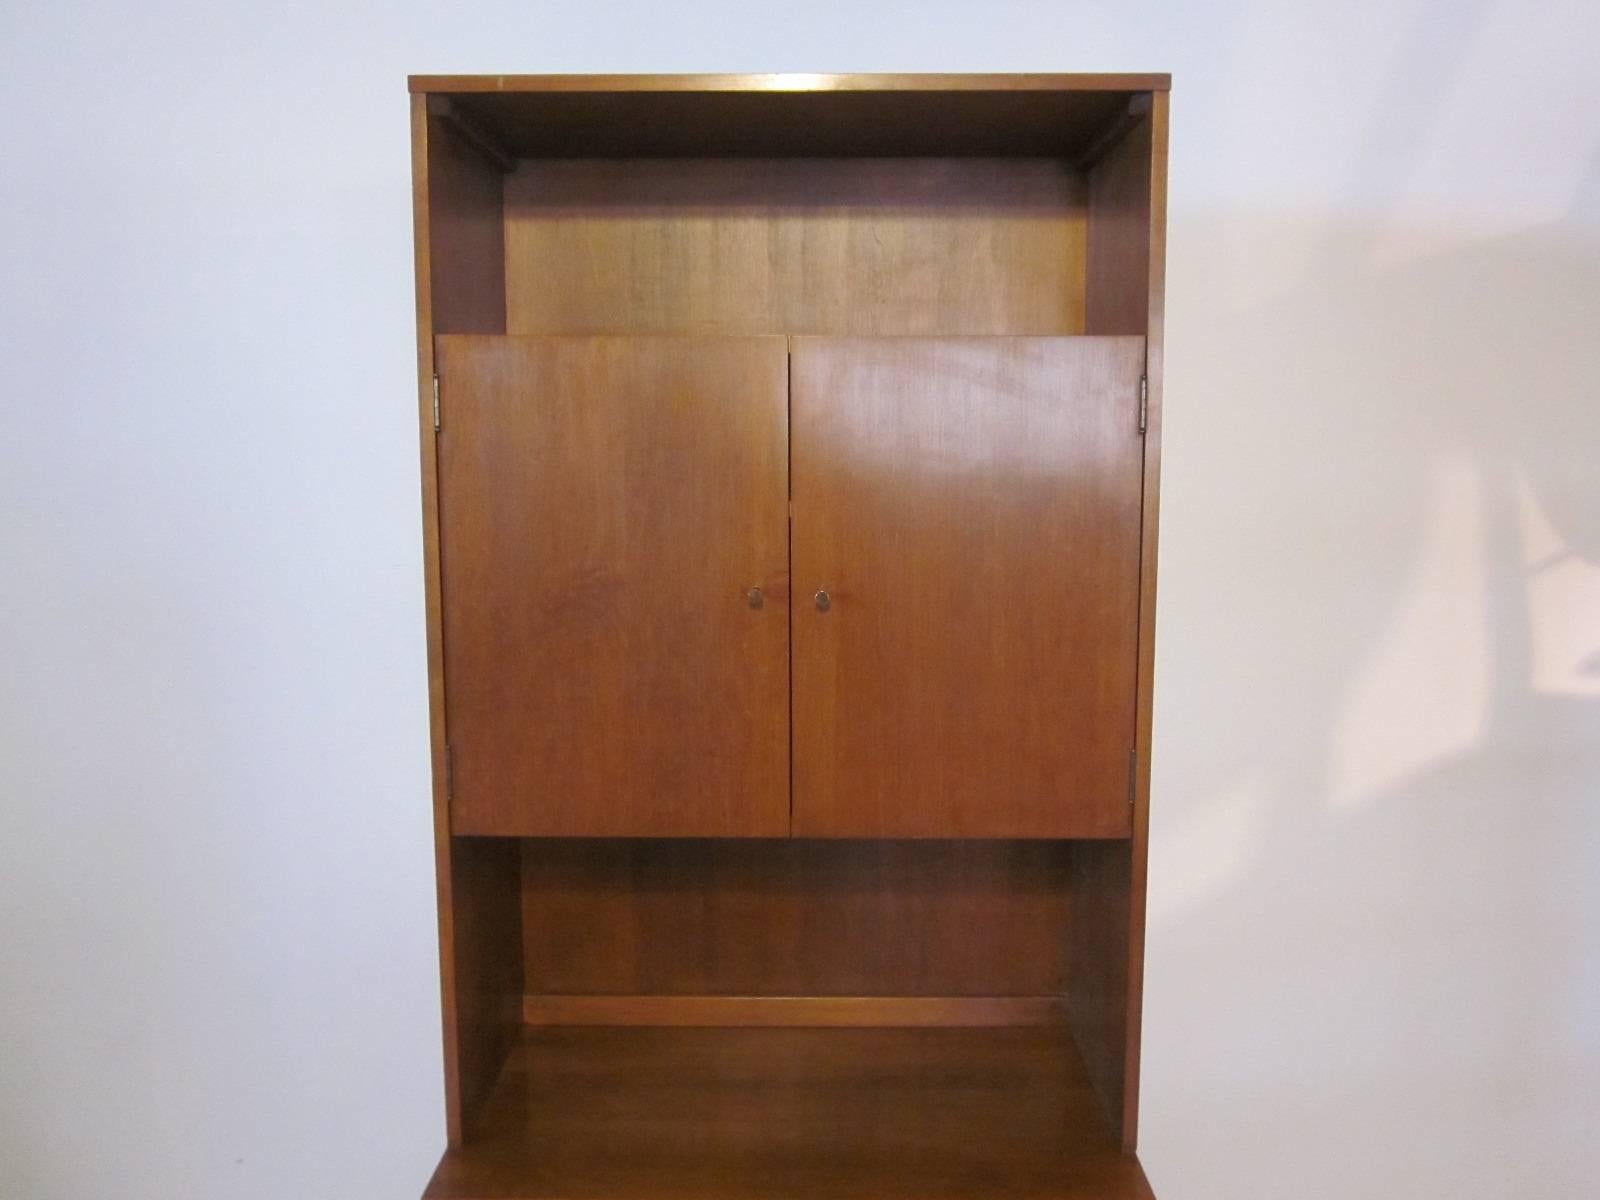 A solid maple two-piece Paul McCobb cabinet with upper and lower adjustable shelves behind the double doors, brass golf tee pulls for the hardware, a lot of storage for a smaller space. From the Planner Group manufactured by the Winchendon Furniture